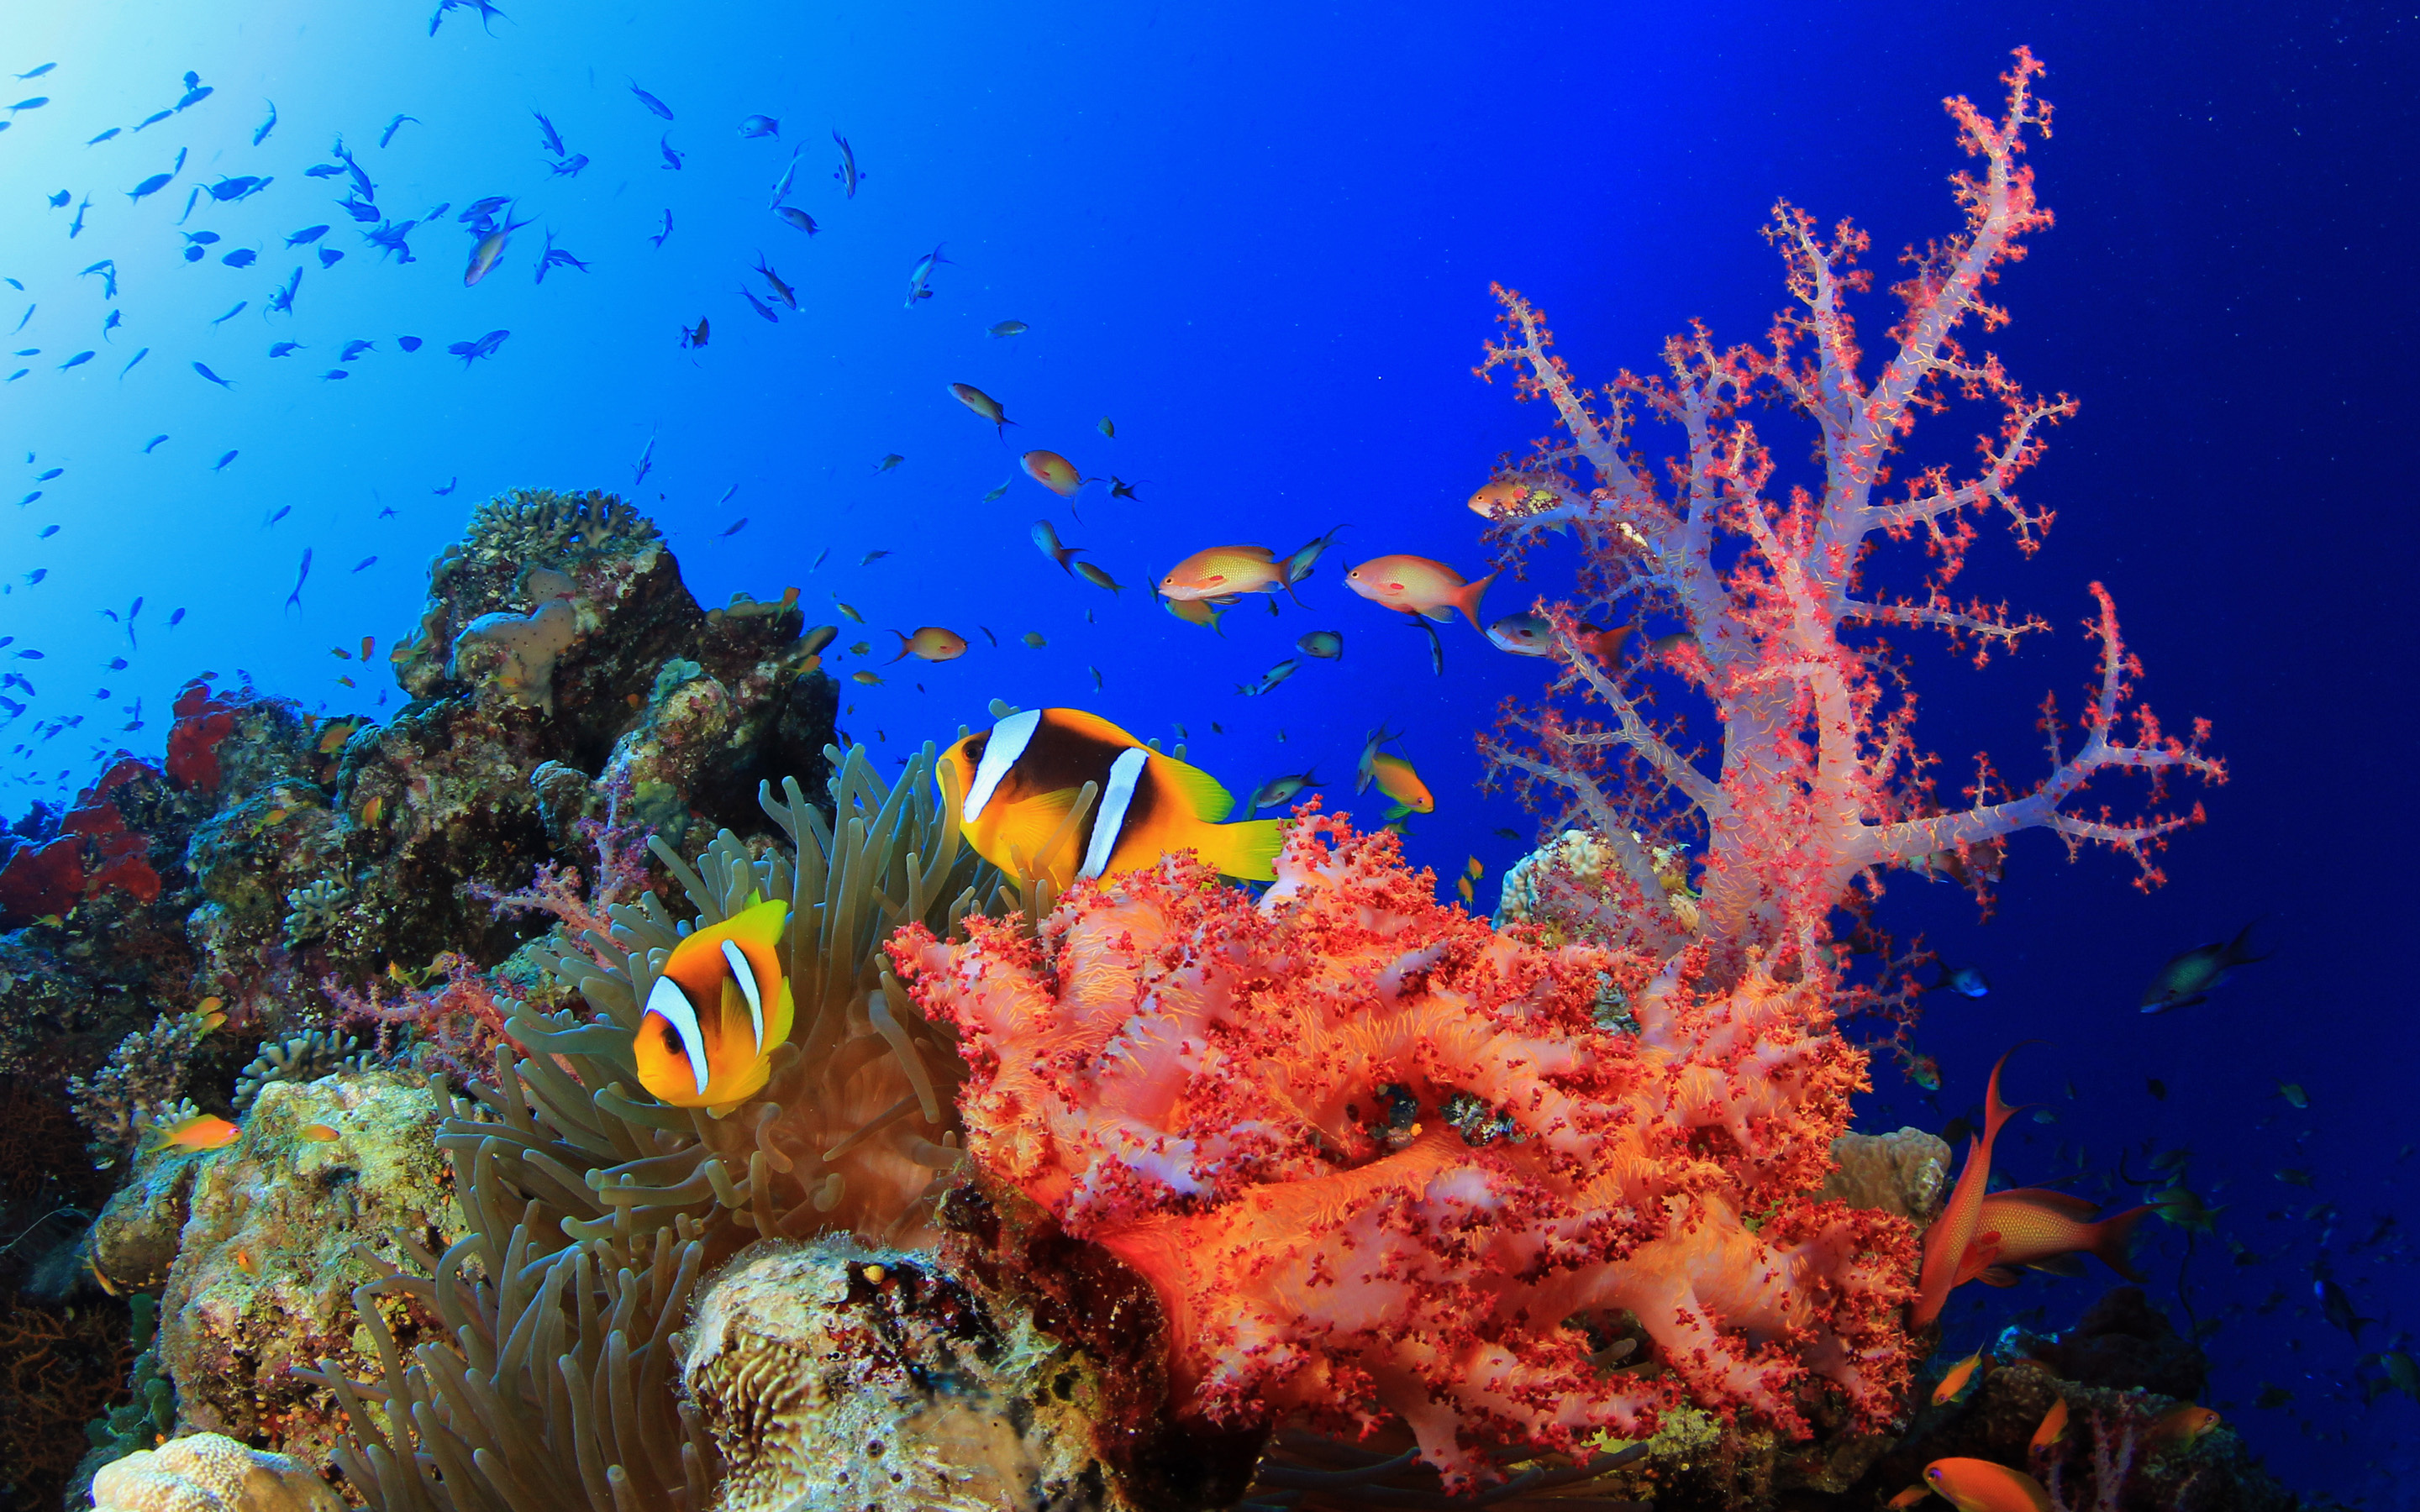 High-definition coral wallpapers, Underwater scenery, Vibrant marine life, Colorful corals, 2880x1800 HD Desktop